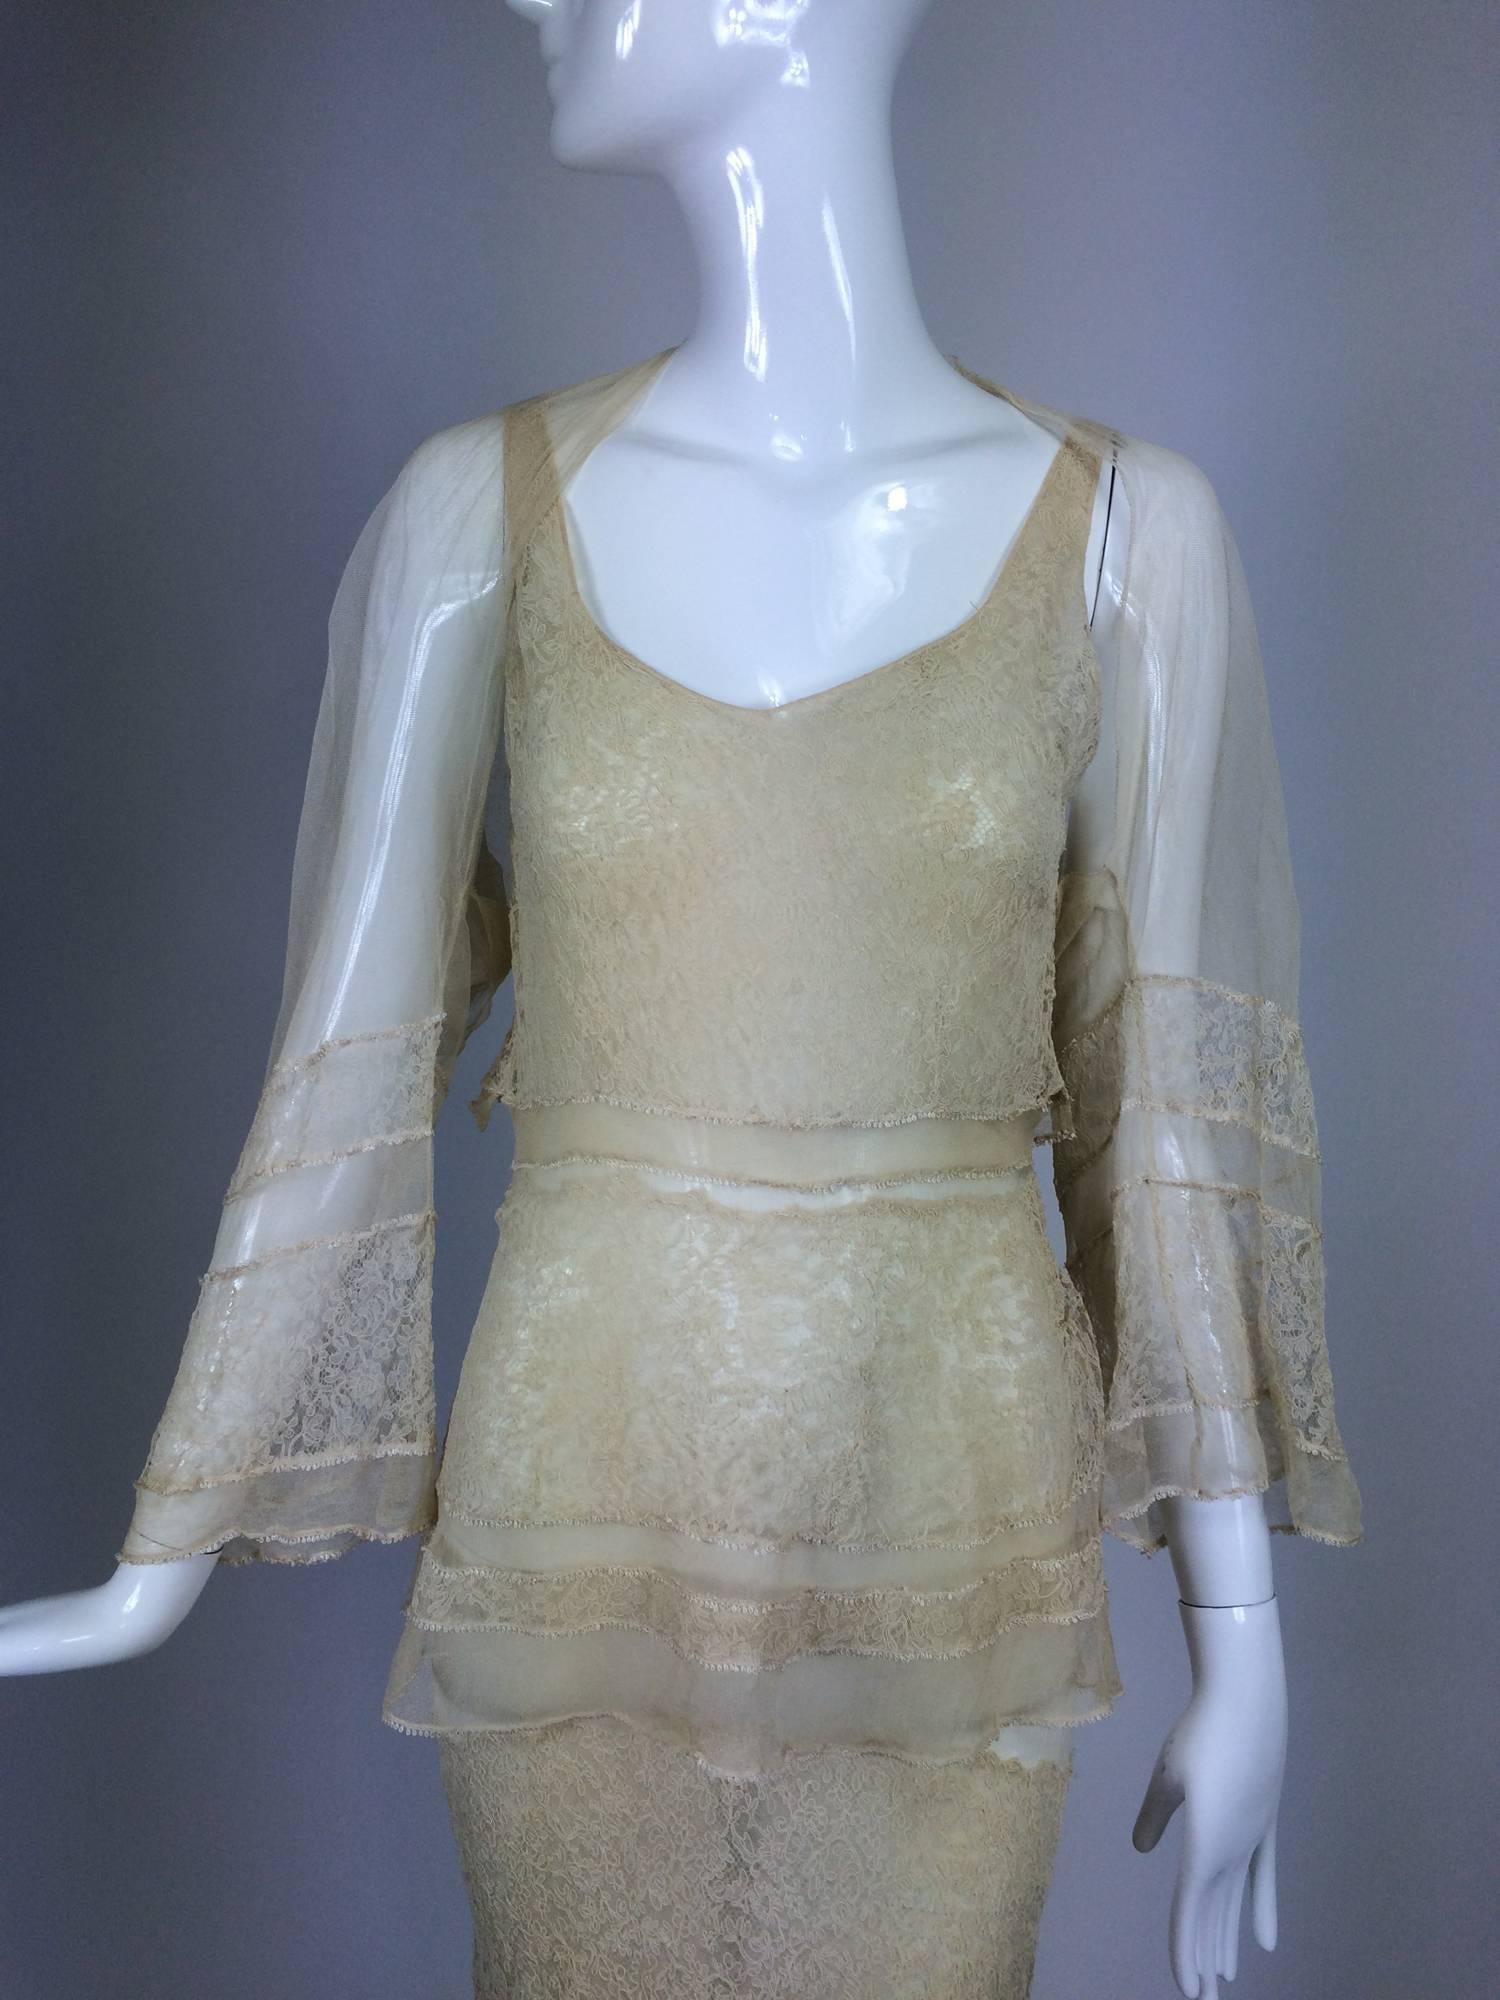 1930s champagne lace & silk bias cut tiered wedding dress & shrug...This would make a fabulous wedding dress...The dress is made from cord applique lace in a champagne colour, it features a deep scoop neckline front and back, the dress is